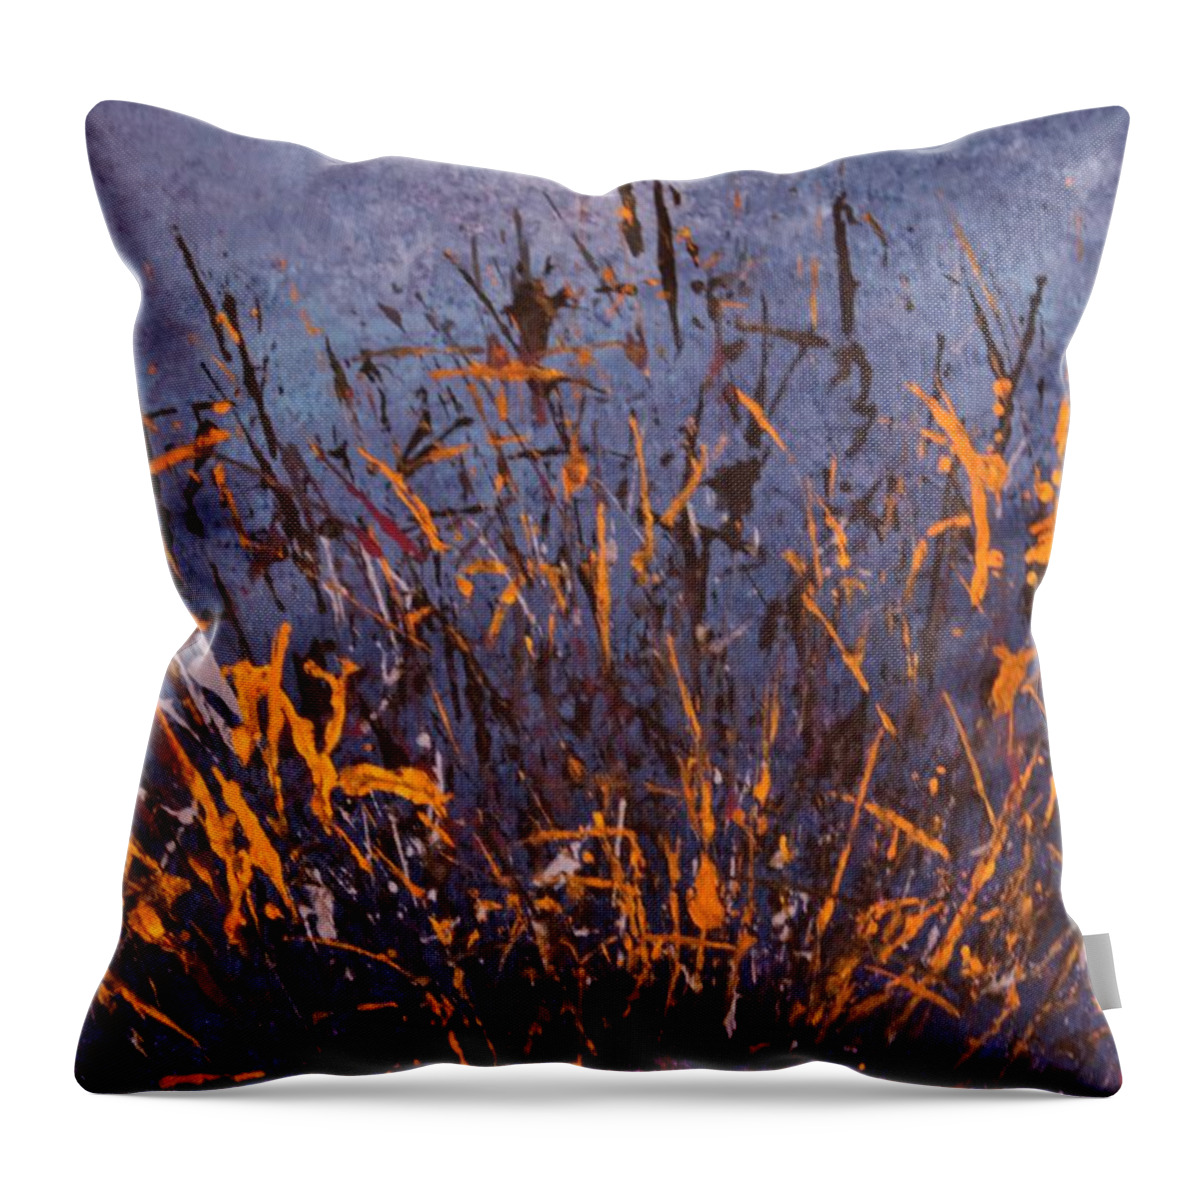 Blue Throw Pillow featuring the painting Dreaming of You by Todd Hoover